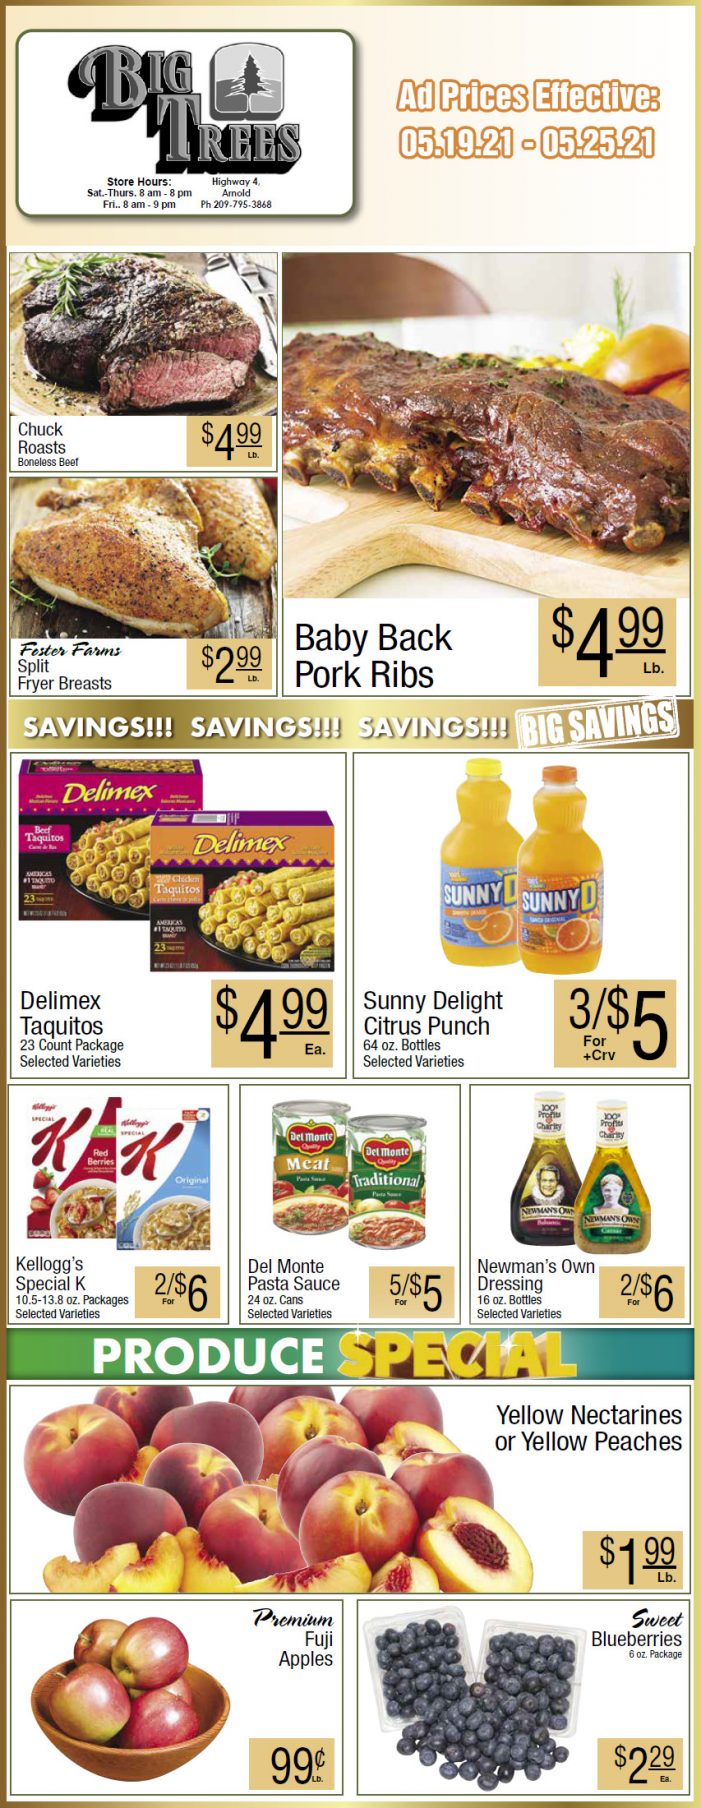 Big Trees Market Weekly Ad & Grocery Specials Through May 25th!  Shop Local & Save!!